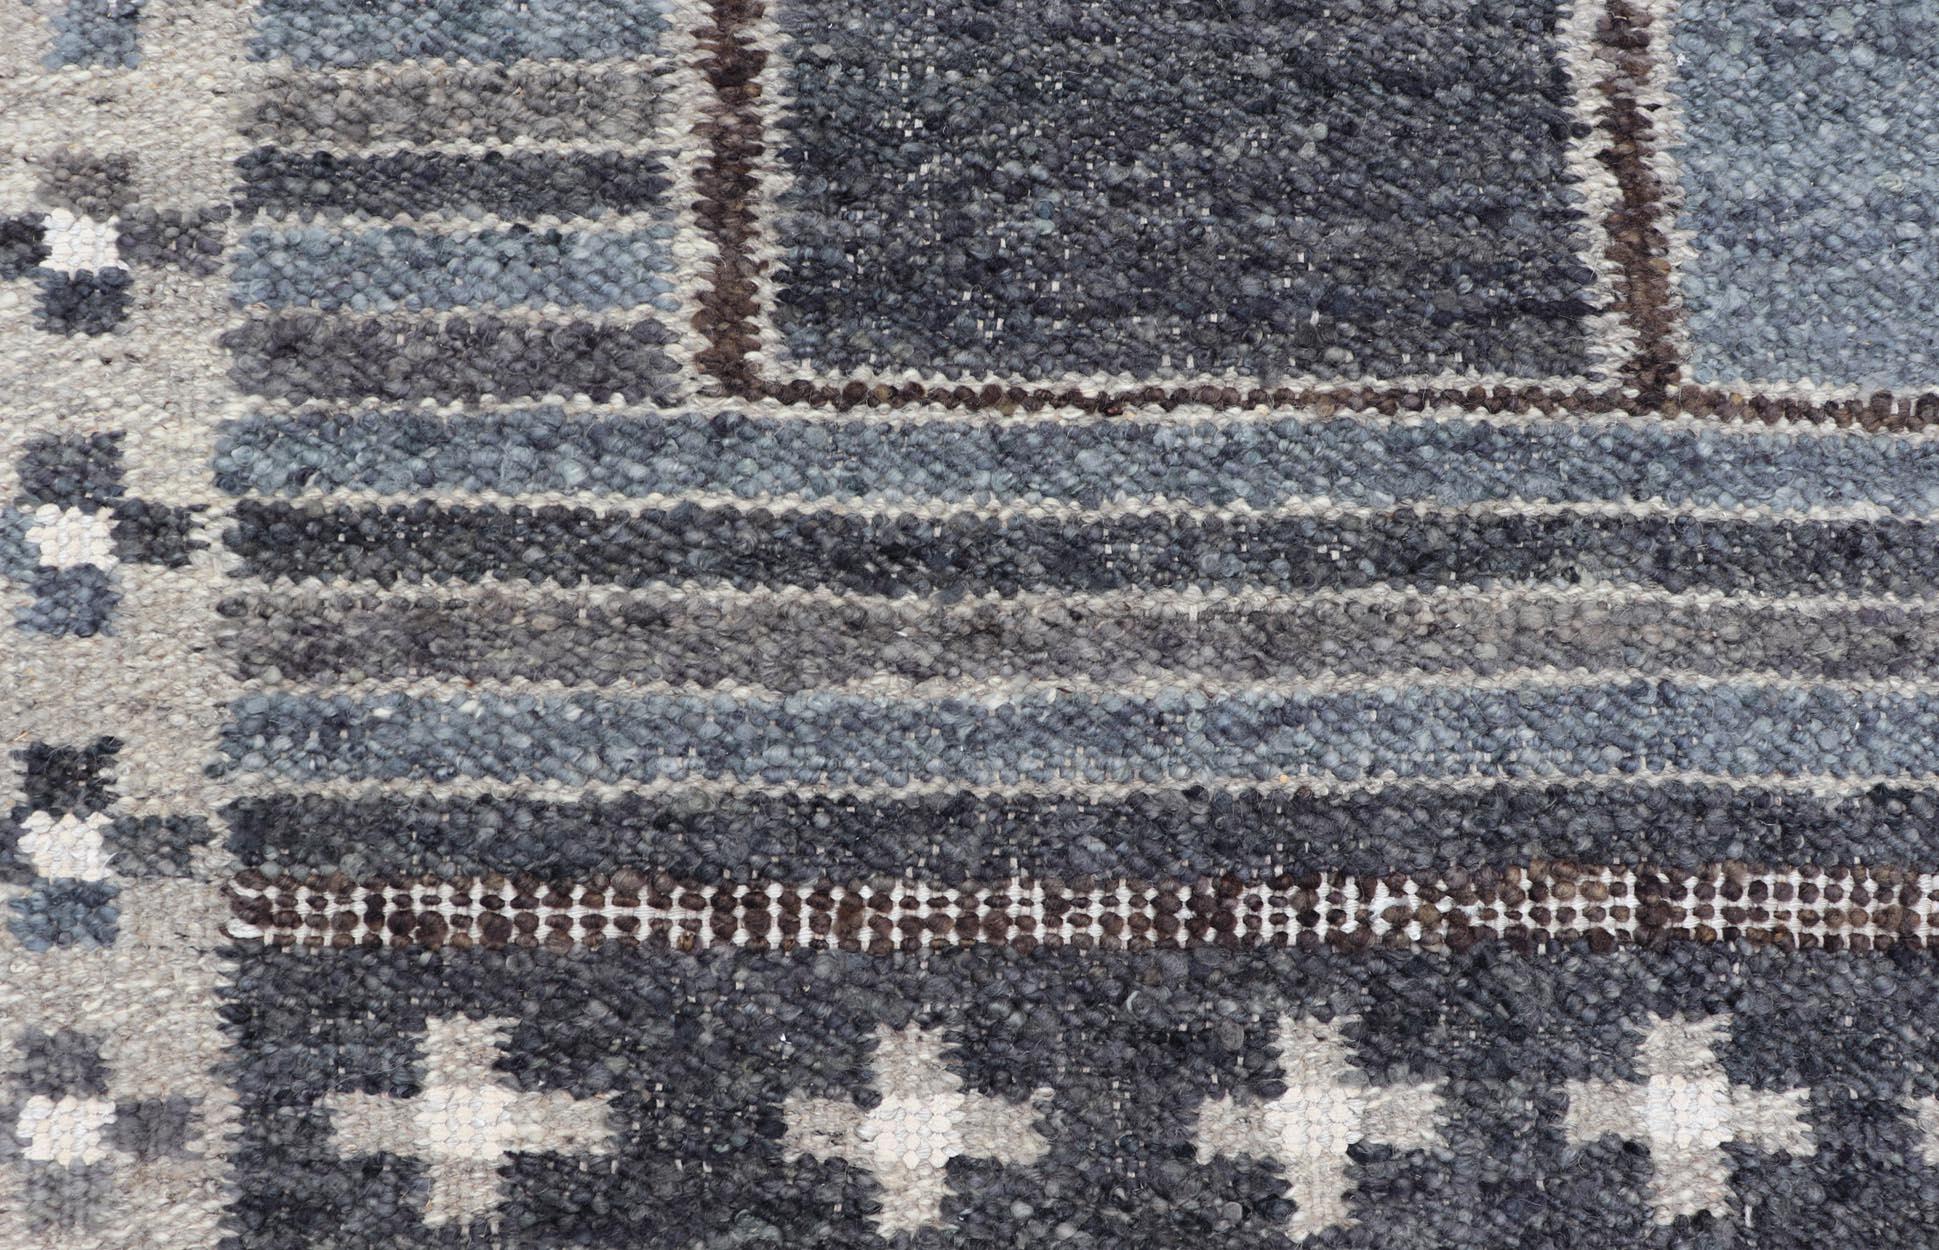 Modern Scandinavian/Swedish Design Rug in Blue, Charcoal, Gray and Cream In New Condition For Sale In Atlanta, GA